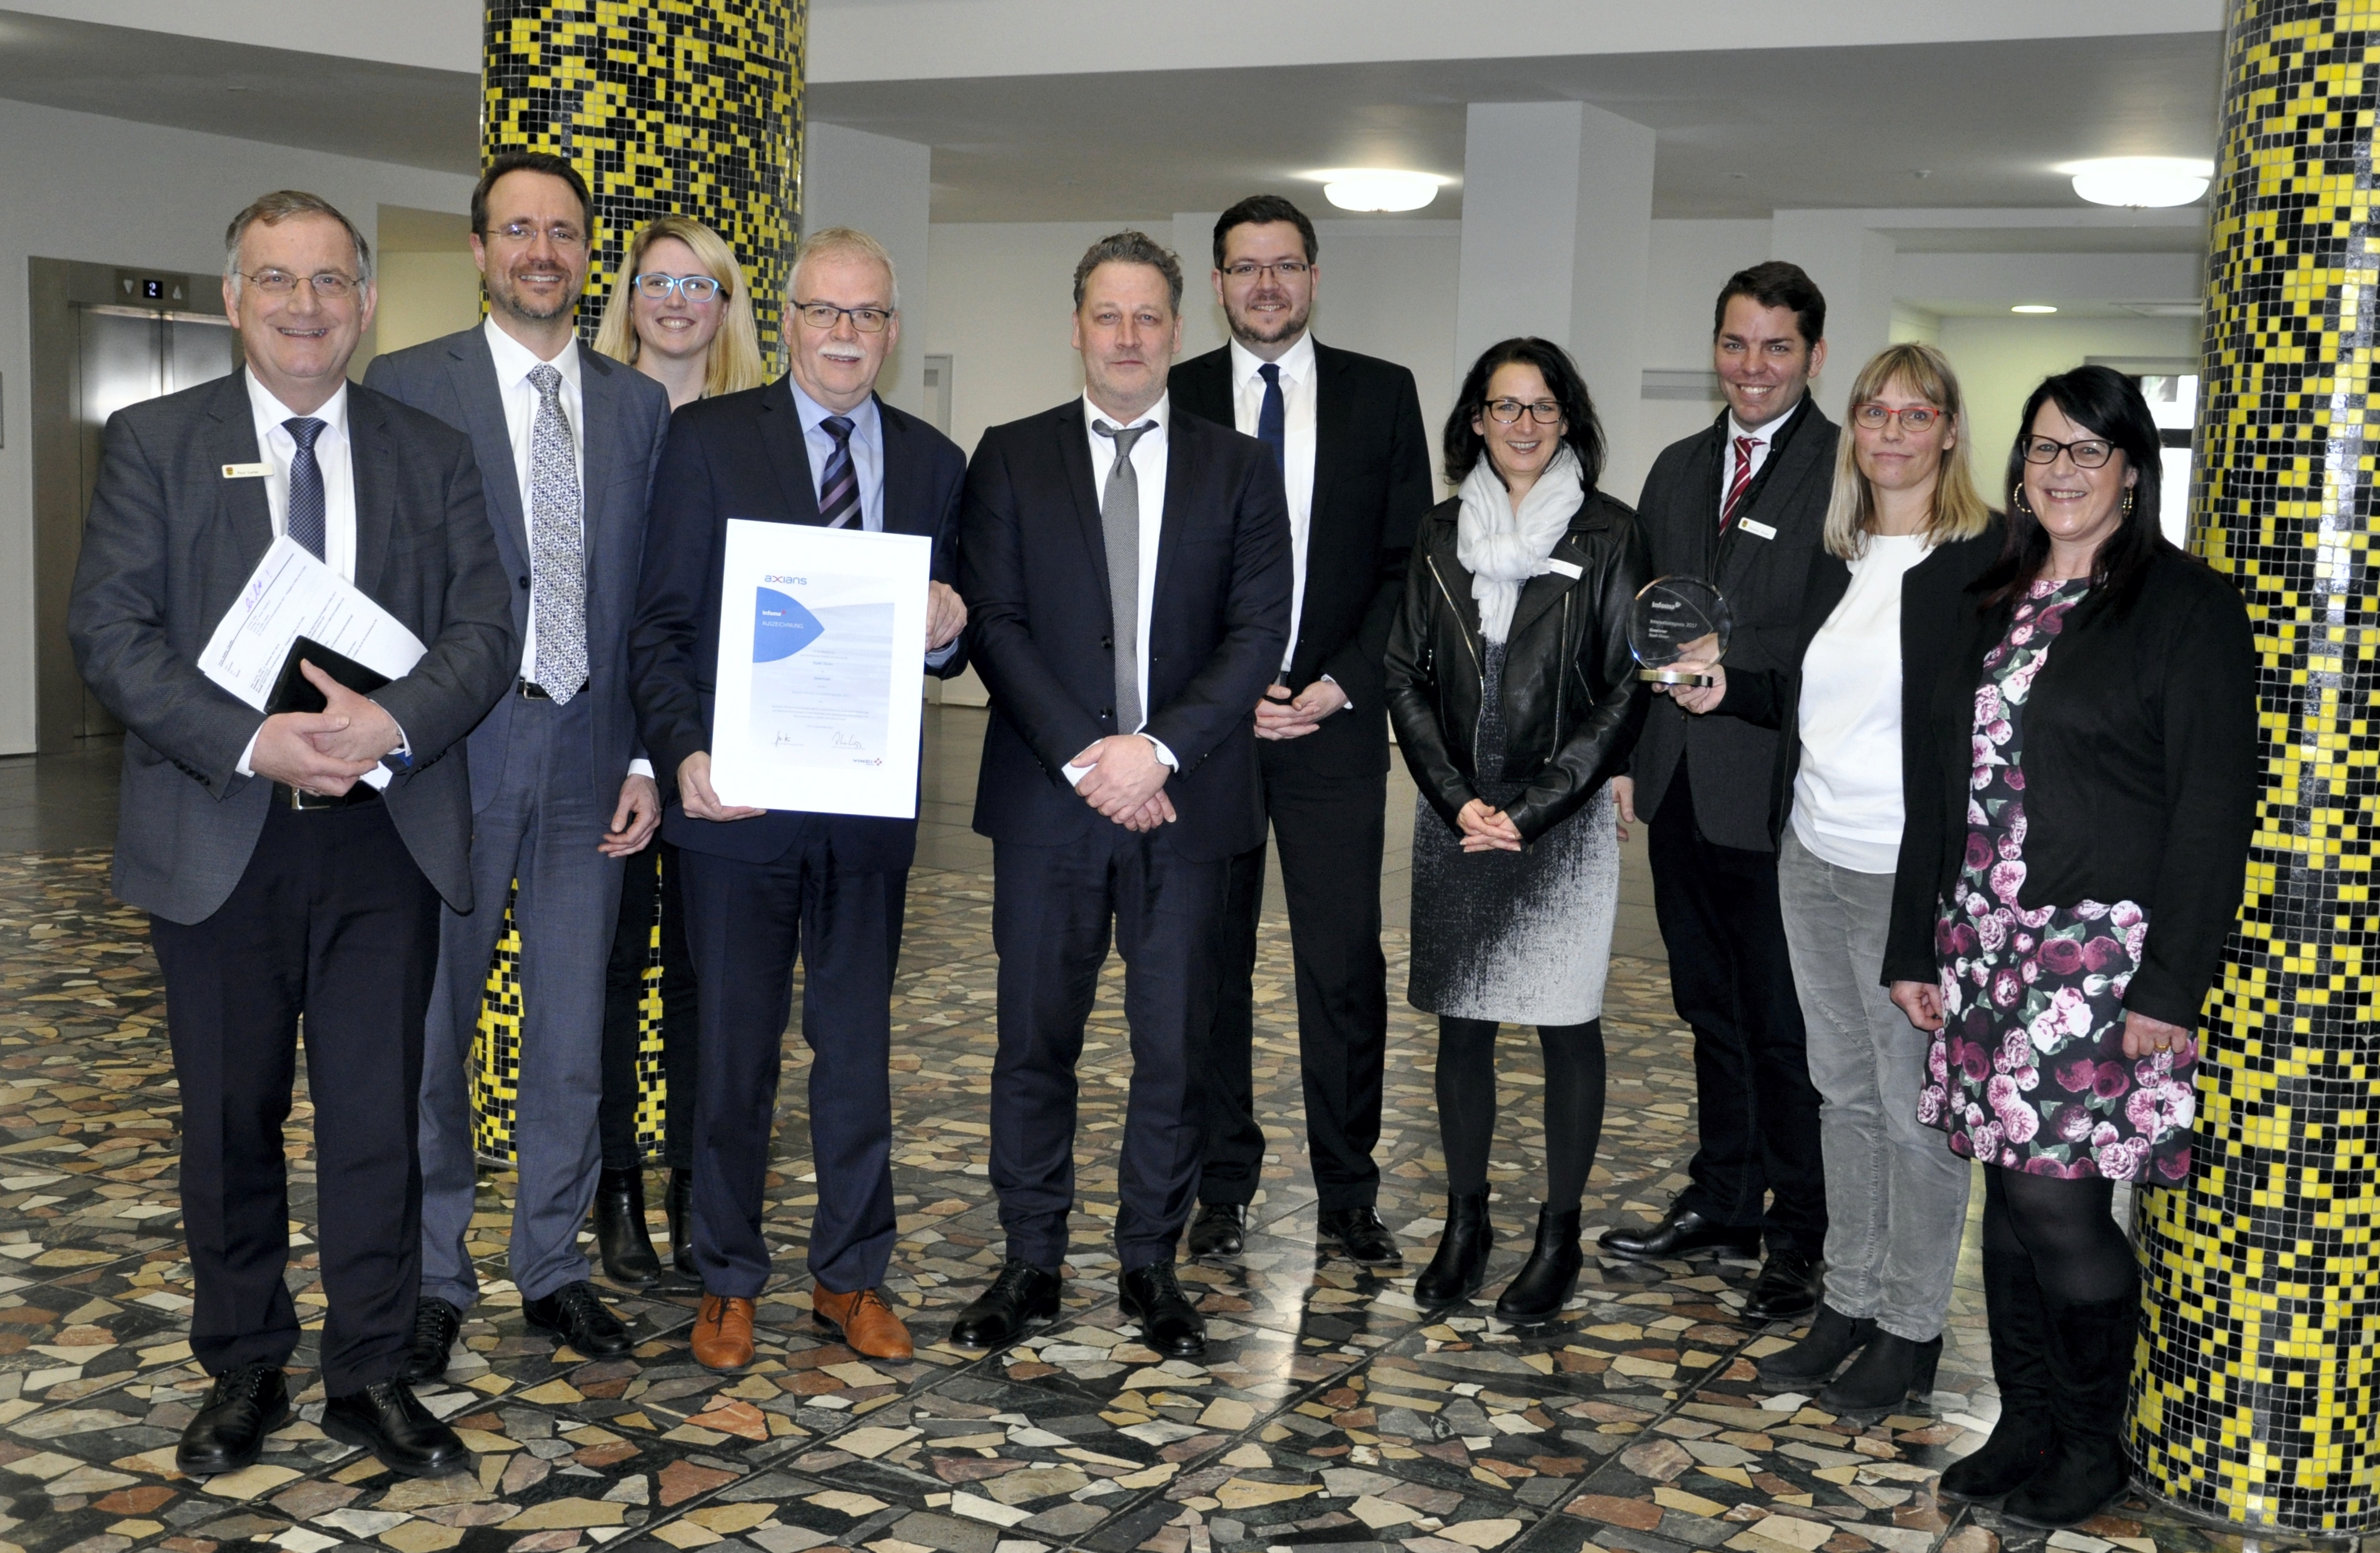 The City of Düren wins Innovation Prize from Axians Infoma for the Second Time